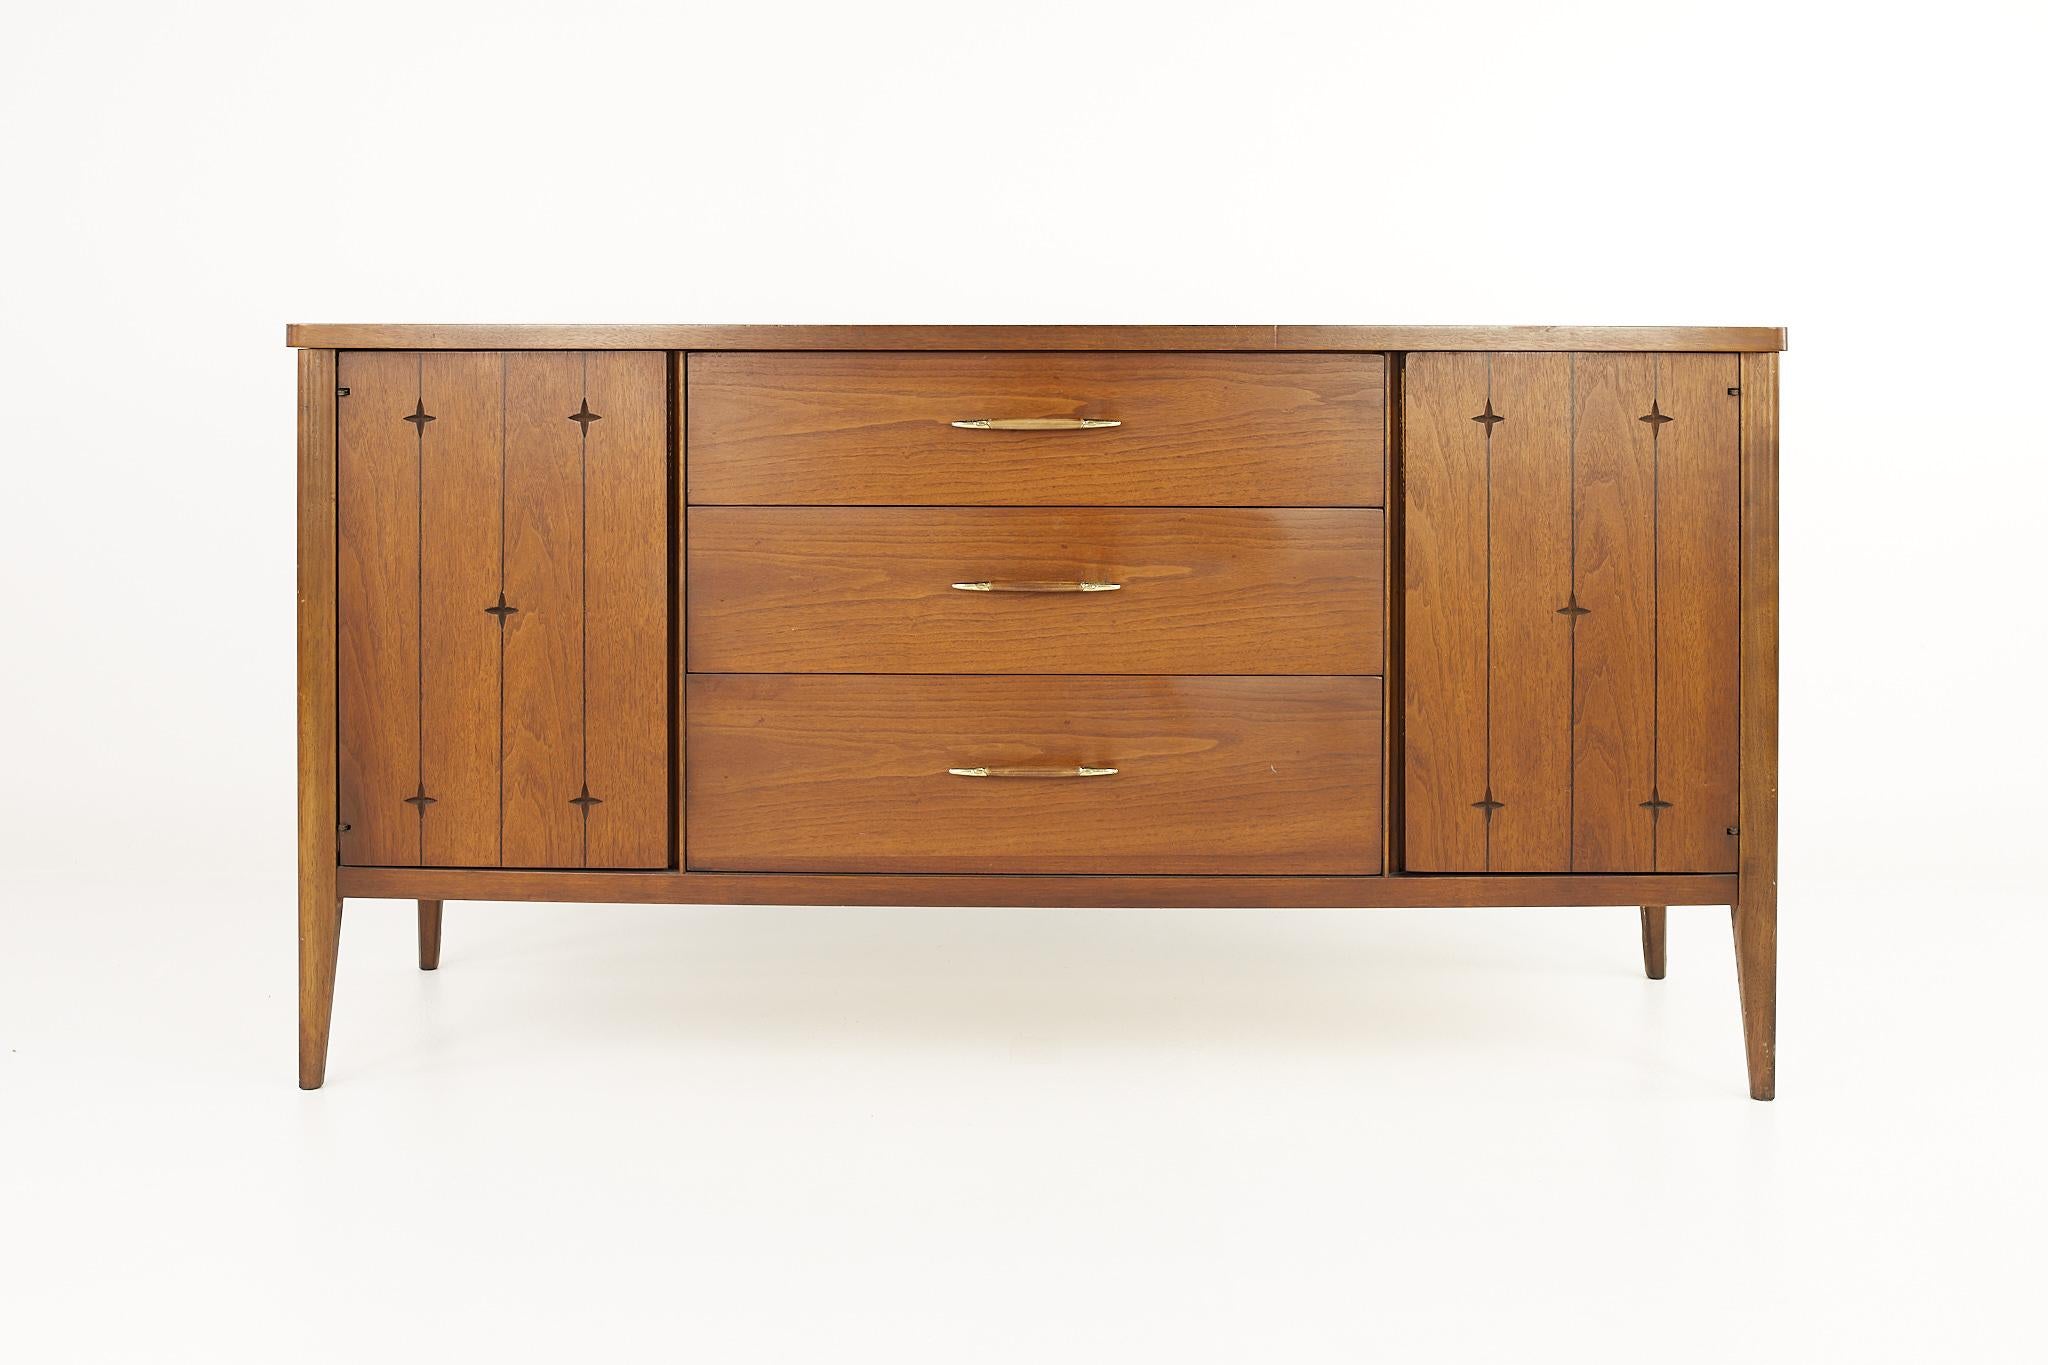 Broyhill Saga mid century walnut sideboard credenza

This credenza measures: 60.25 wide x 19.75 deep x 31 inches high

?All pieces of furniture can be had in what we call restored vintage condition. That means the piece is restored upon purchase